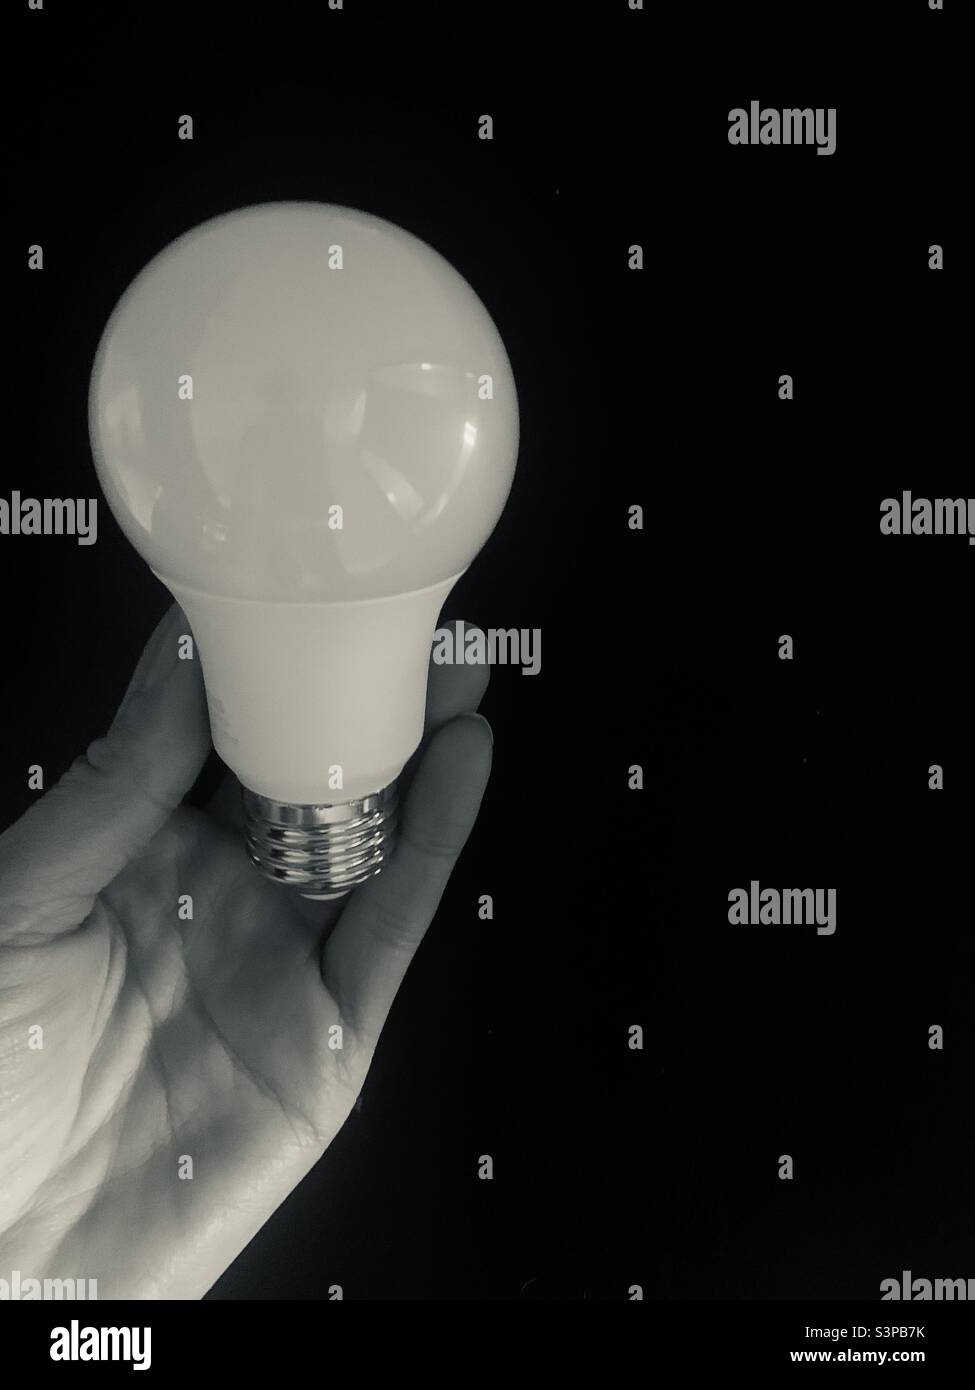 Holding a lightbulb in hand on a black background Stock Photo